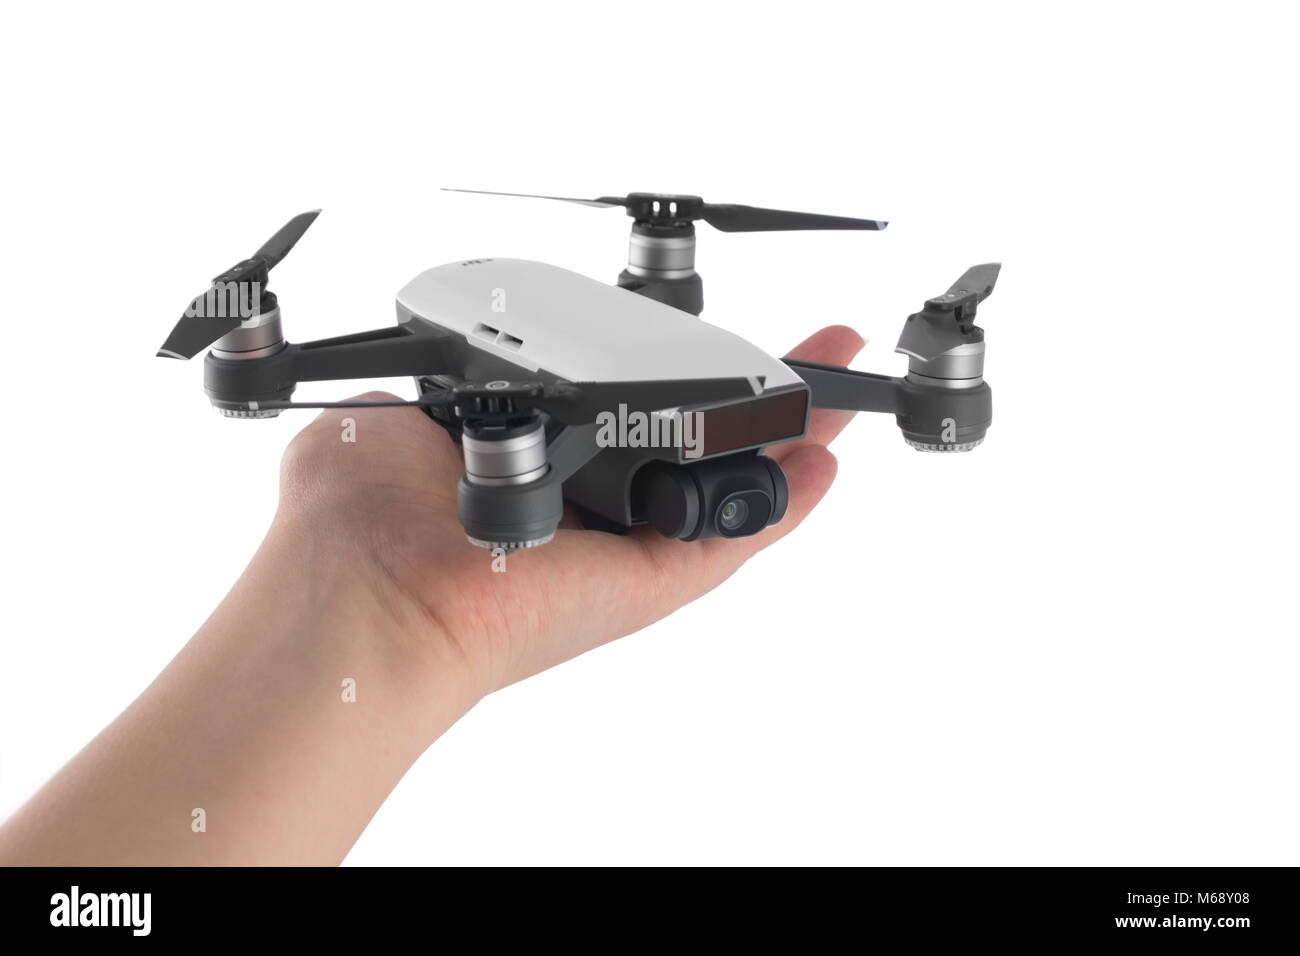 Mini Drone High Resolution Stock Photography and Images - Alamy